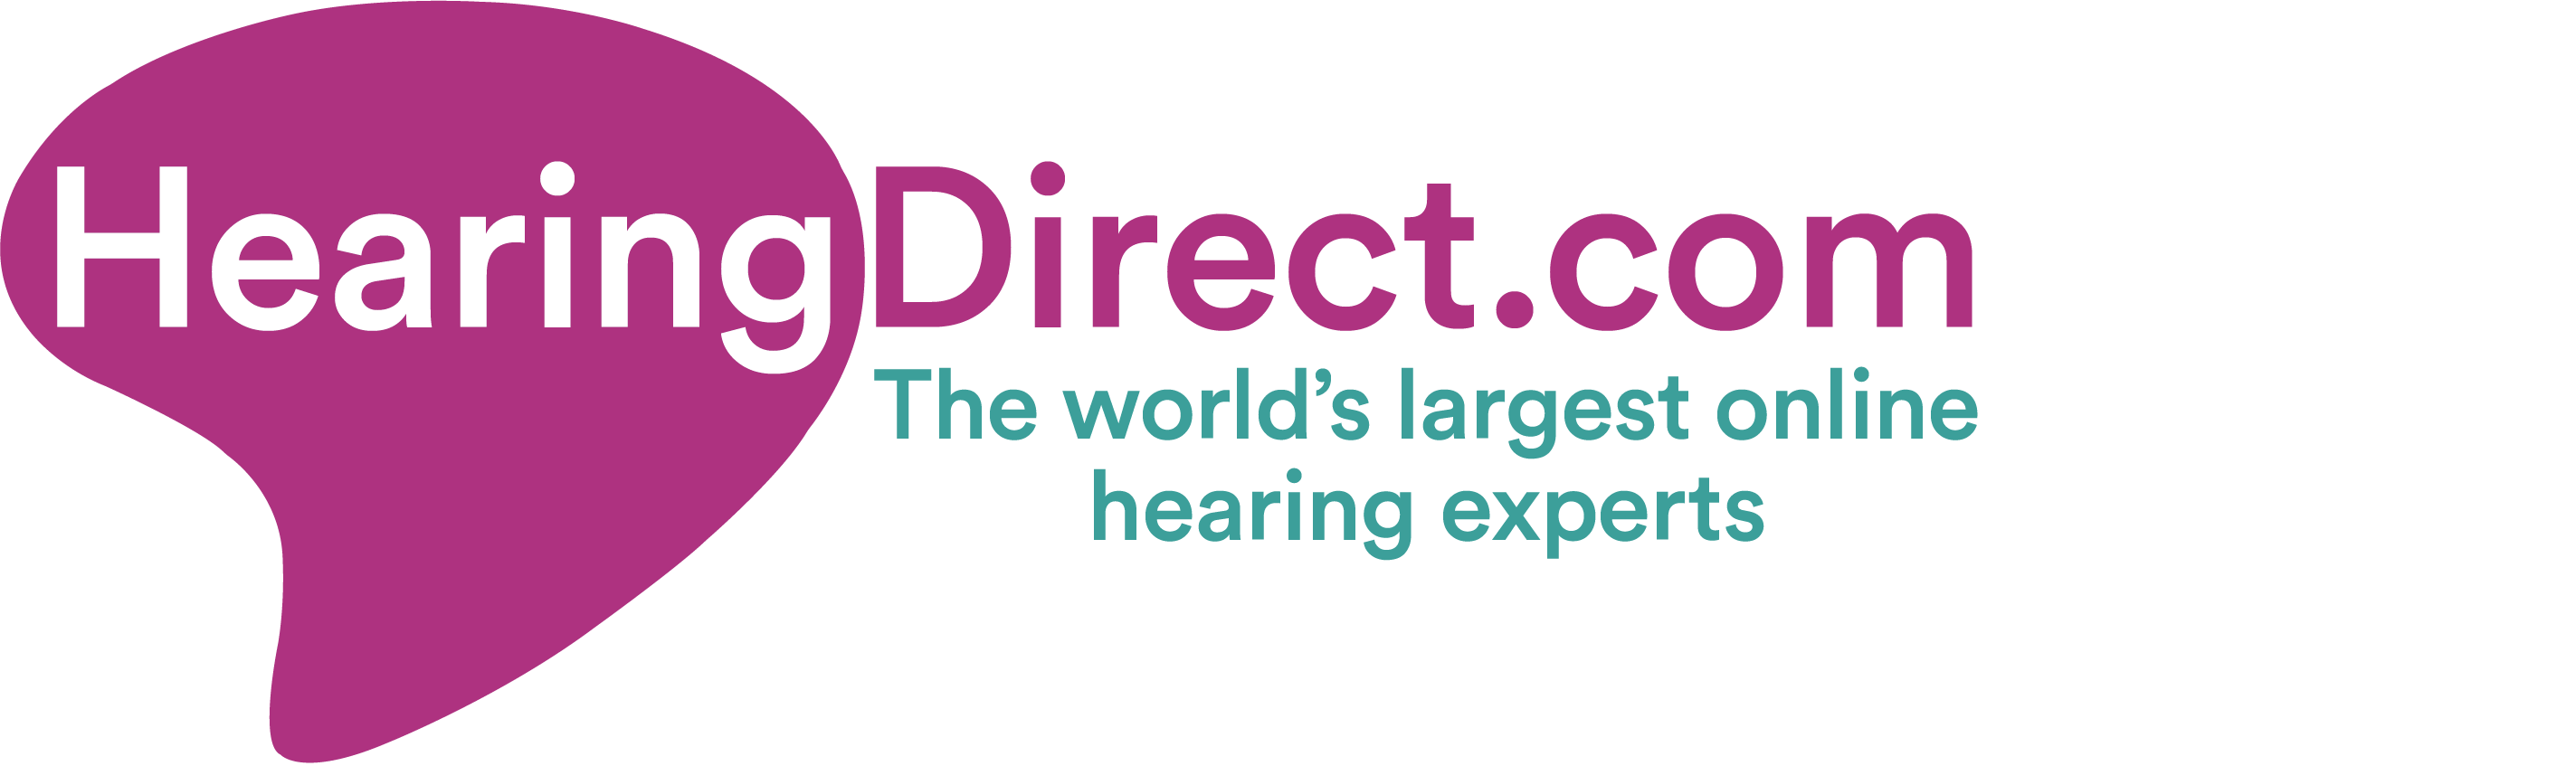 Experience the Future of Hearing | Introducing the ReSound range at Hearing Direct UK